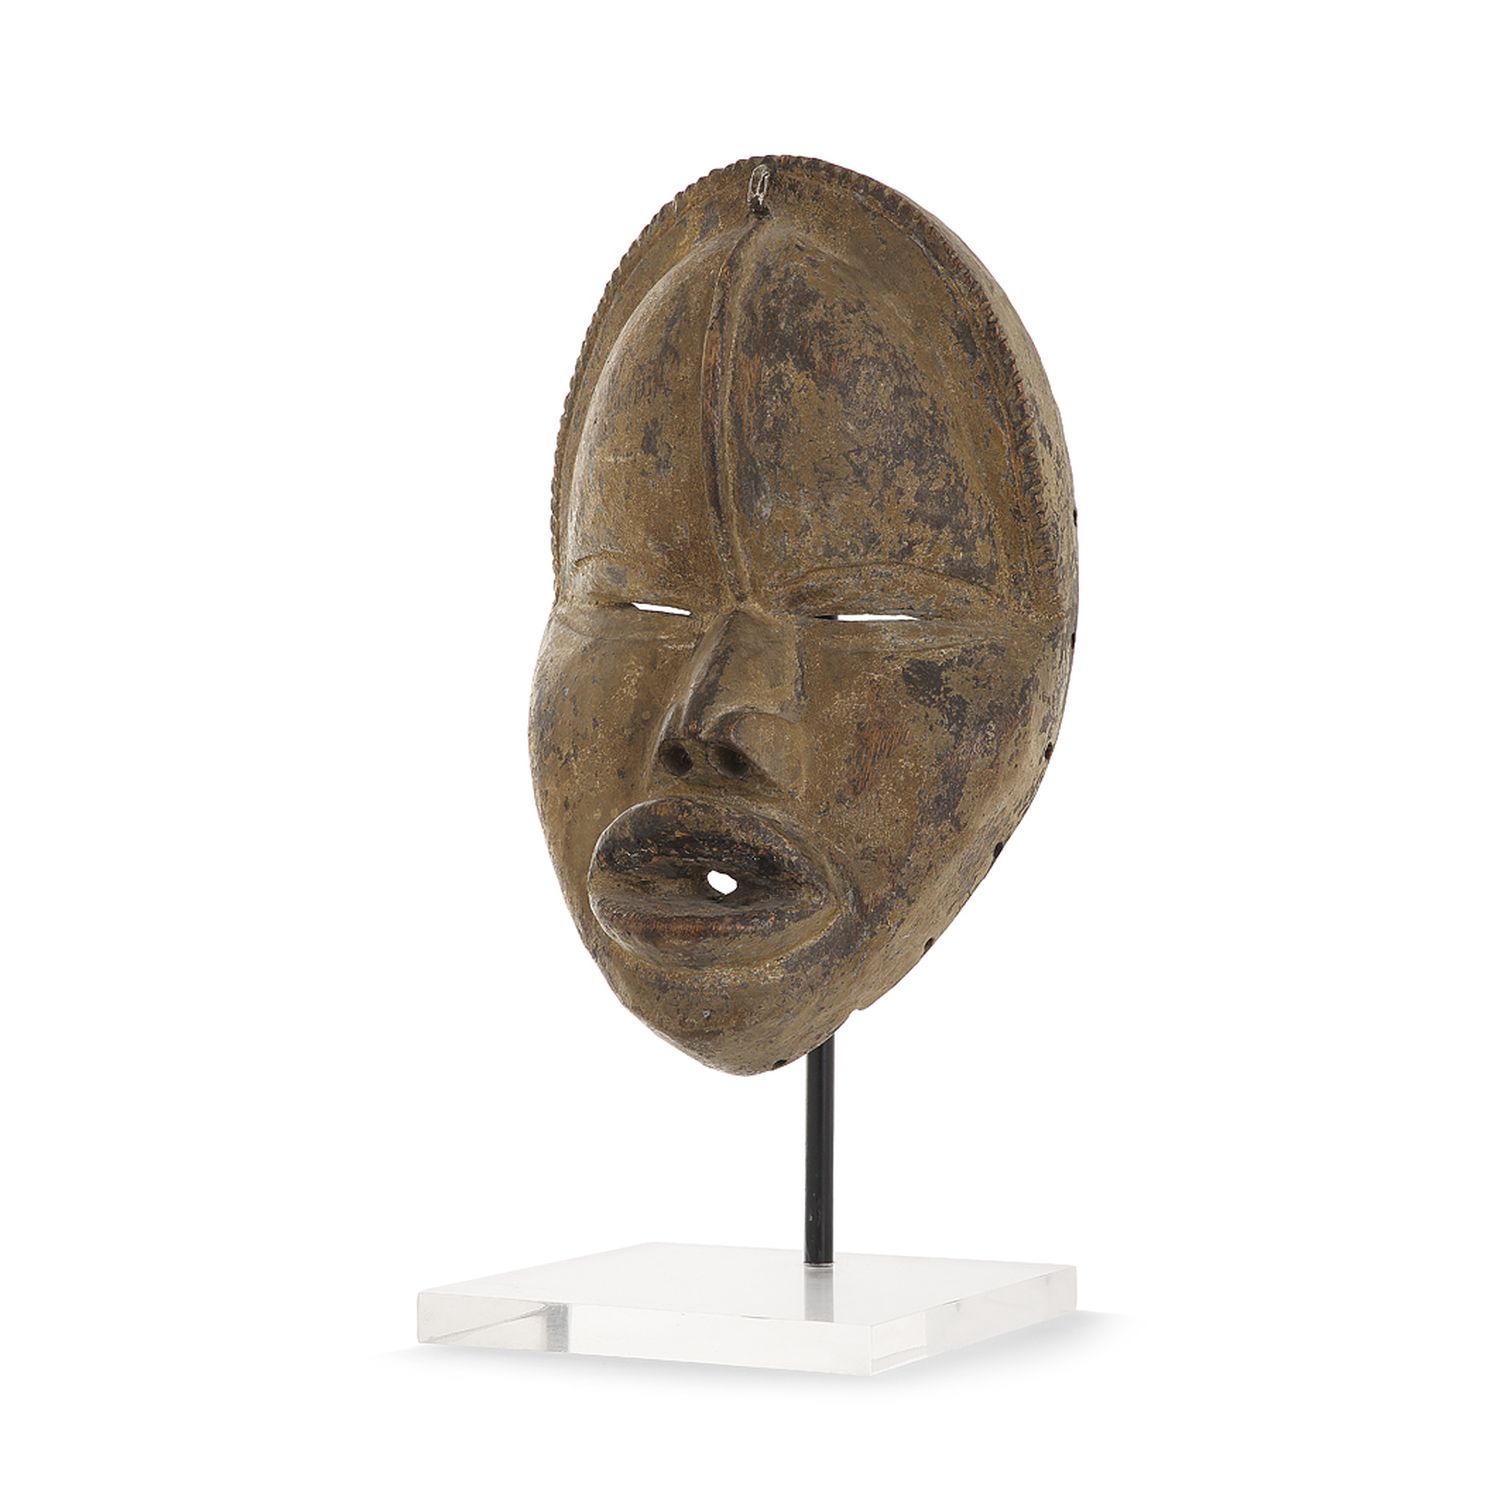 Null DAN STYLE DECORATION MASK, IVORY COAST
wood with crumbling patina
(Wear)
A &hellip;